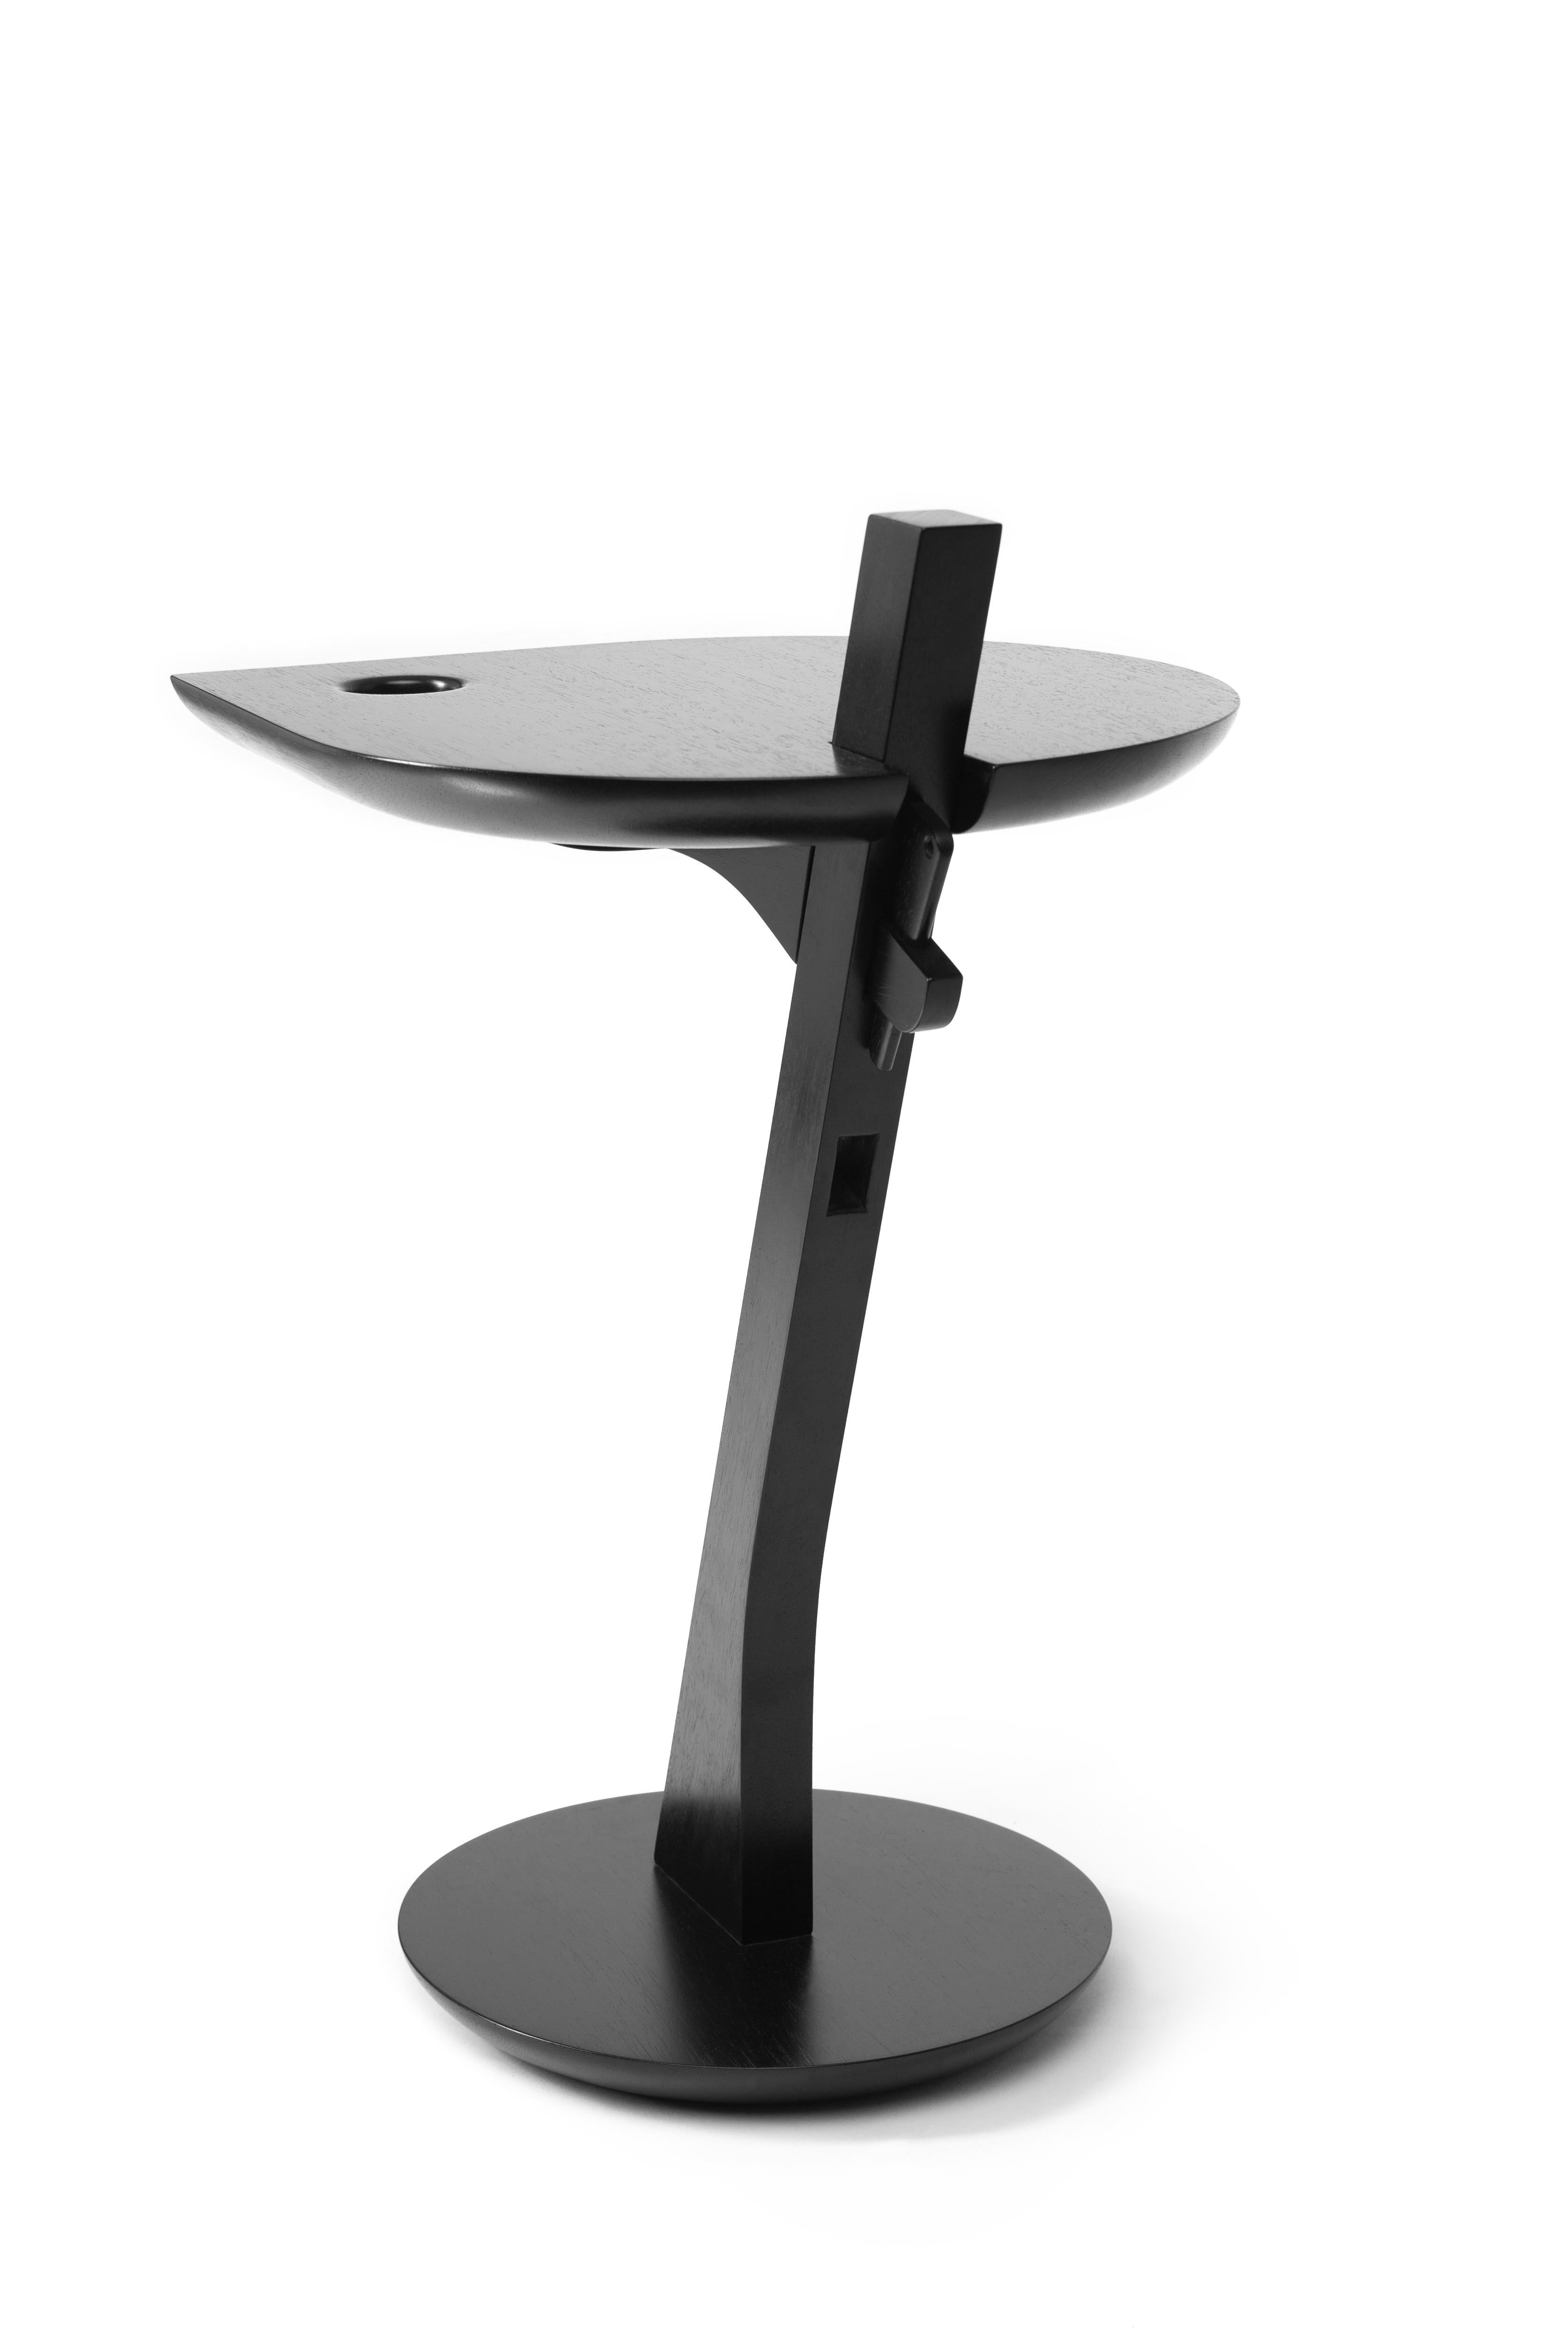 Brazilian Set of 02 Side Tables IRACEMA in Ebony Finish Wood For Sale